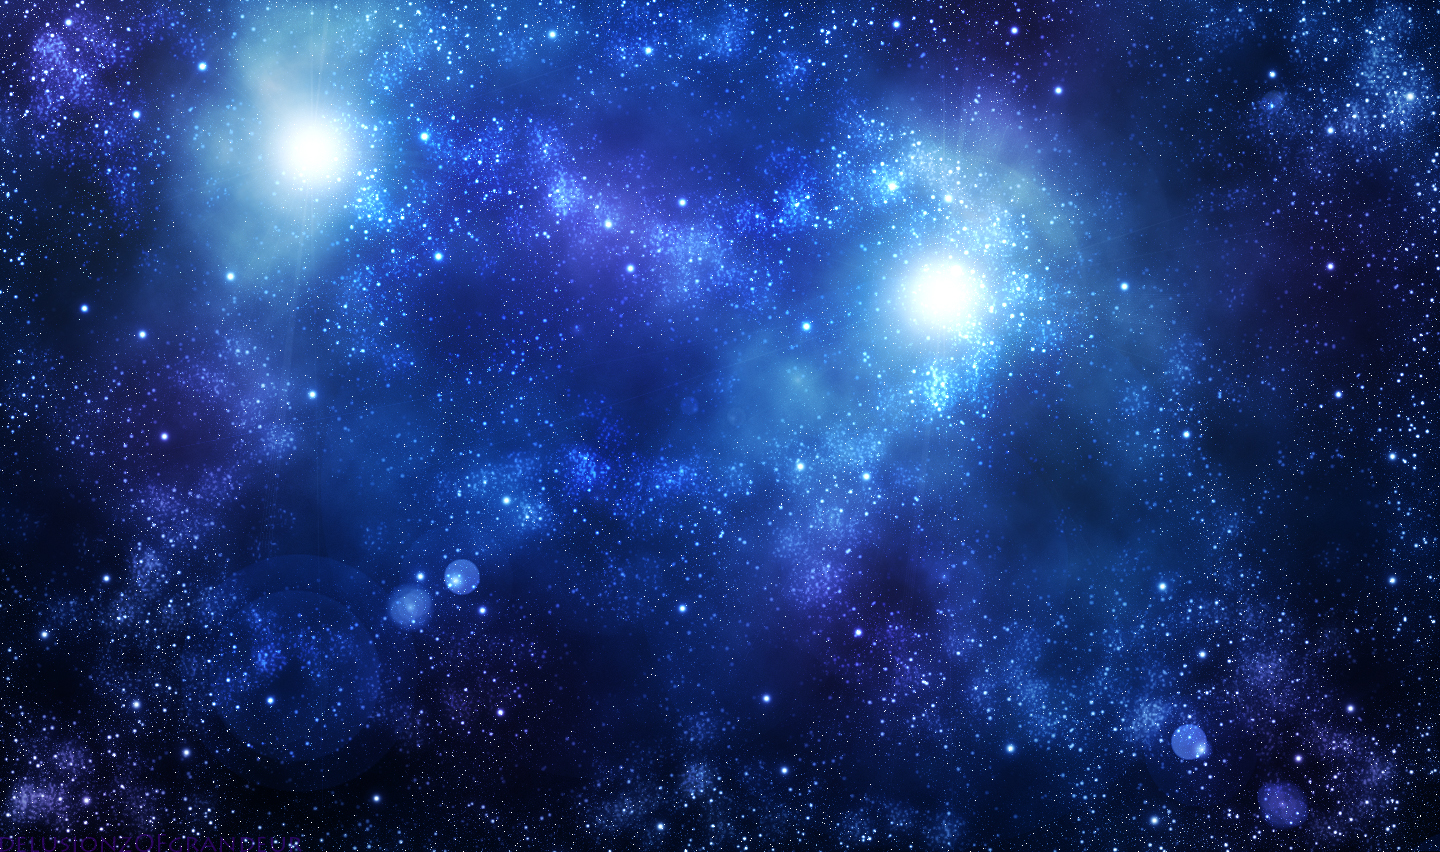 Free Download Space Galaxy Hd Wallpapers Wallpaper202 1440x852